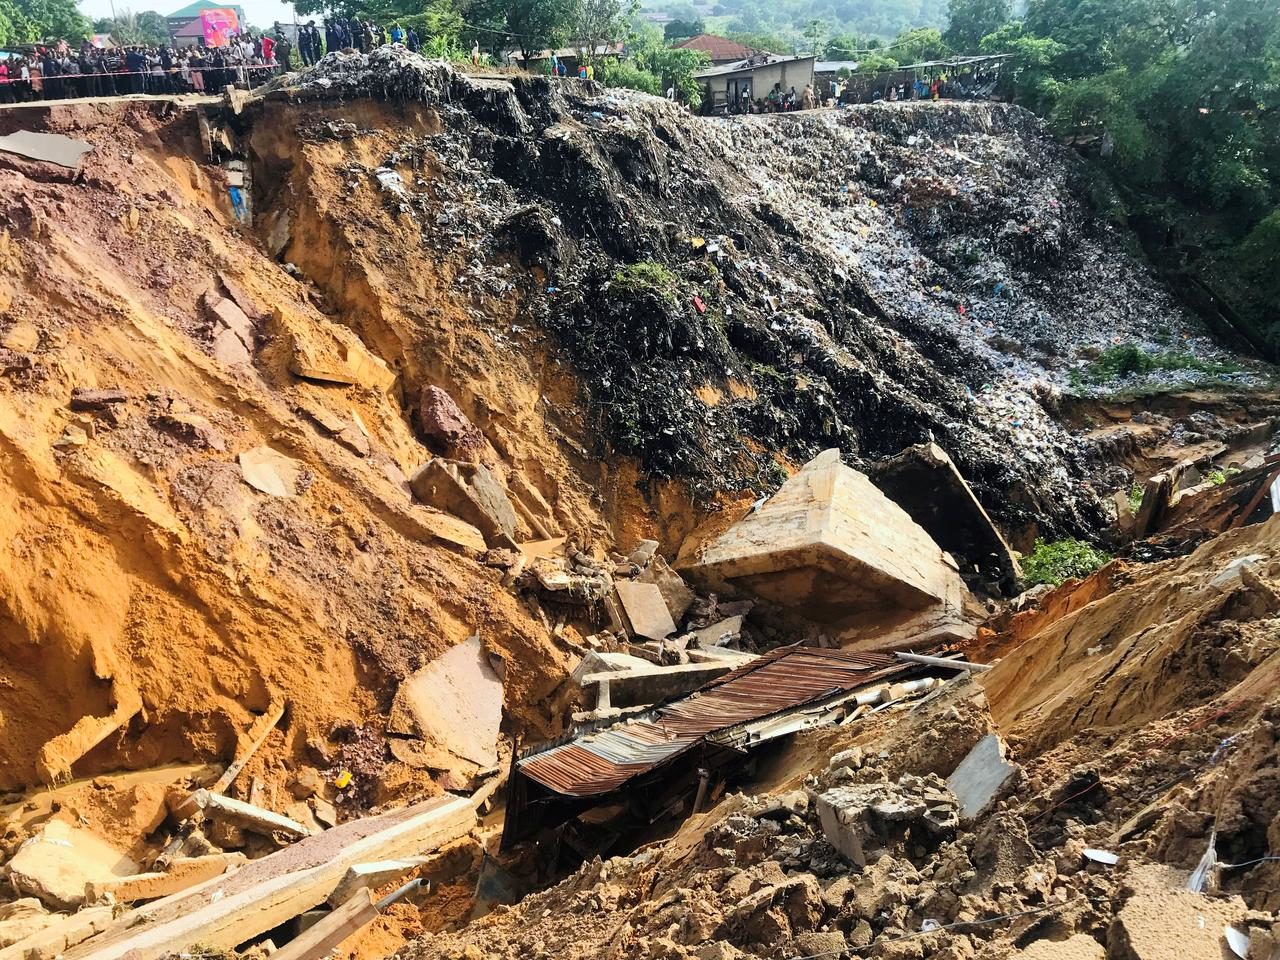 Residents stand near the scene of a landslide following torrential rains near the University of Kinshasa, in the Democratic Republic of Congo November 26, 2019.